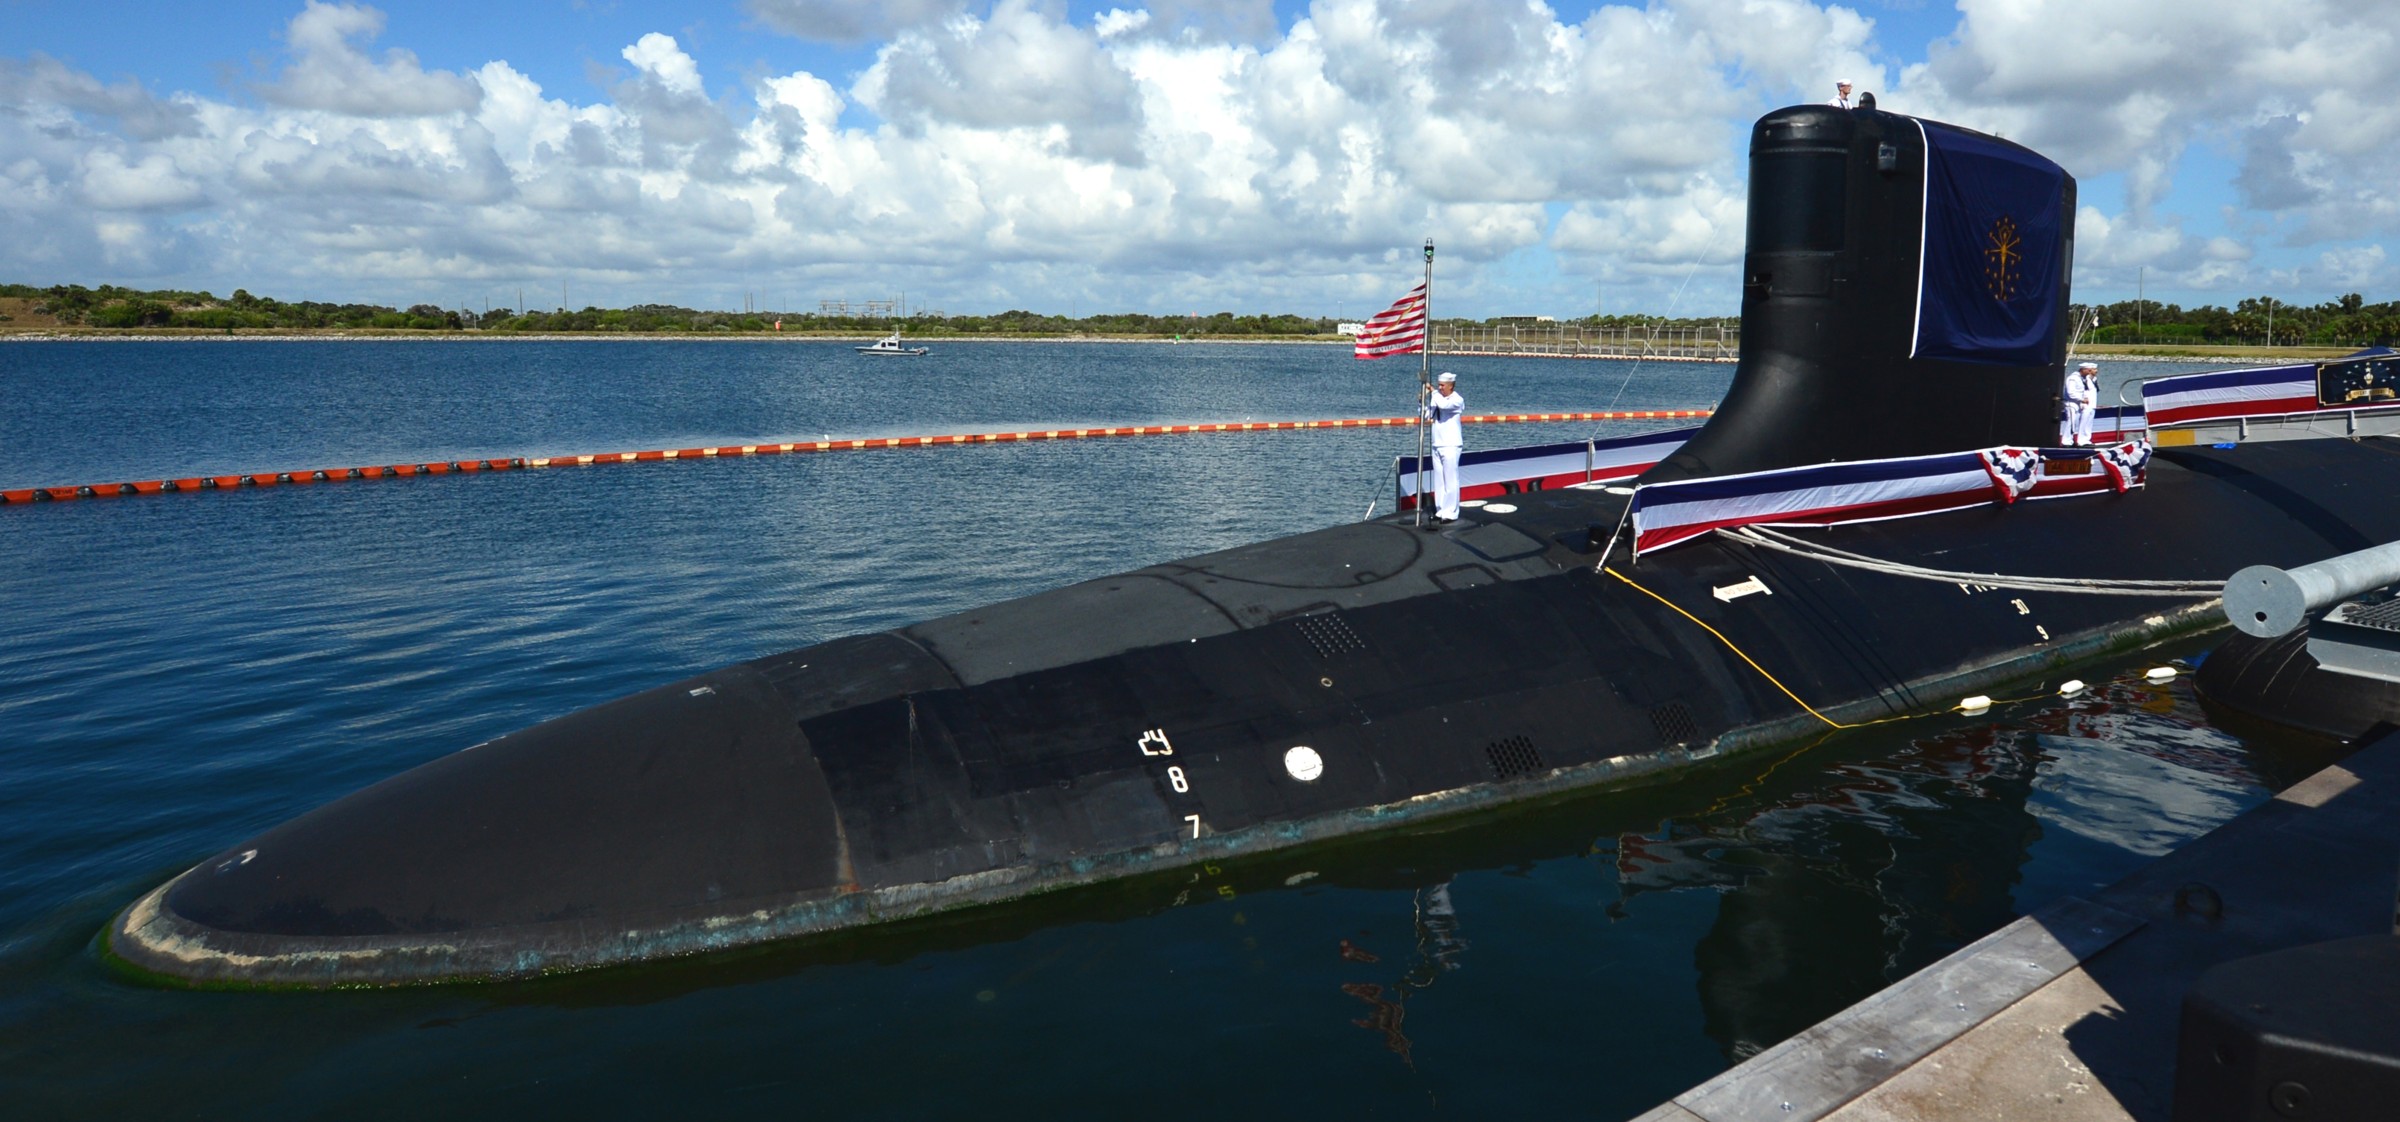 ssn-789 uss indiana virginia class attack submarine us navy commissioning ceremony port canaveral florida 15